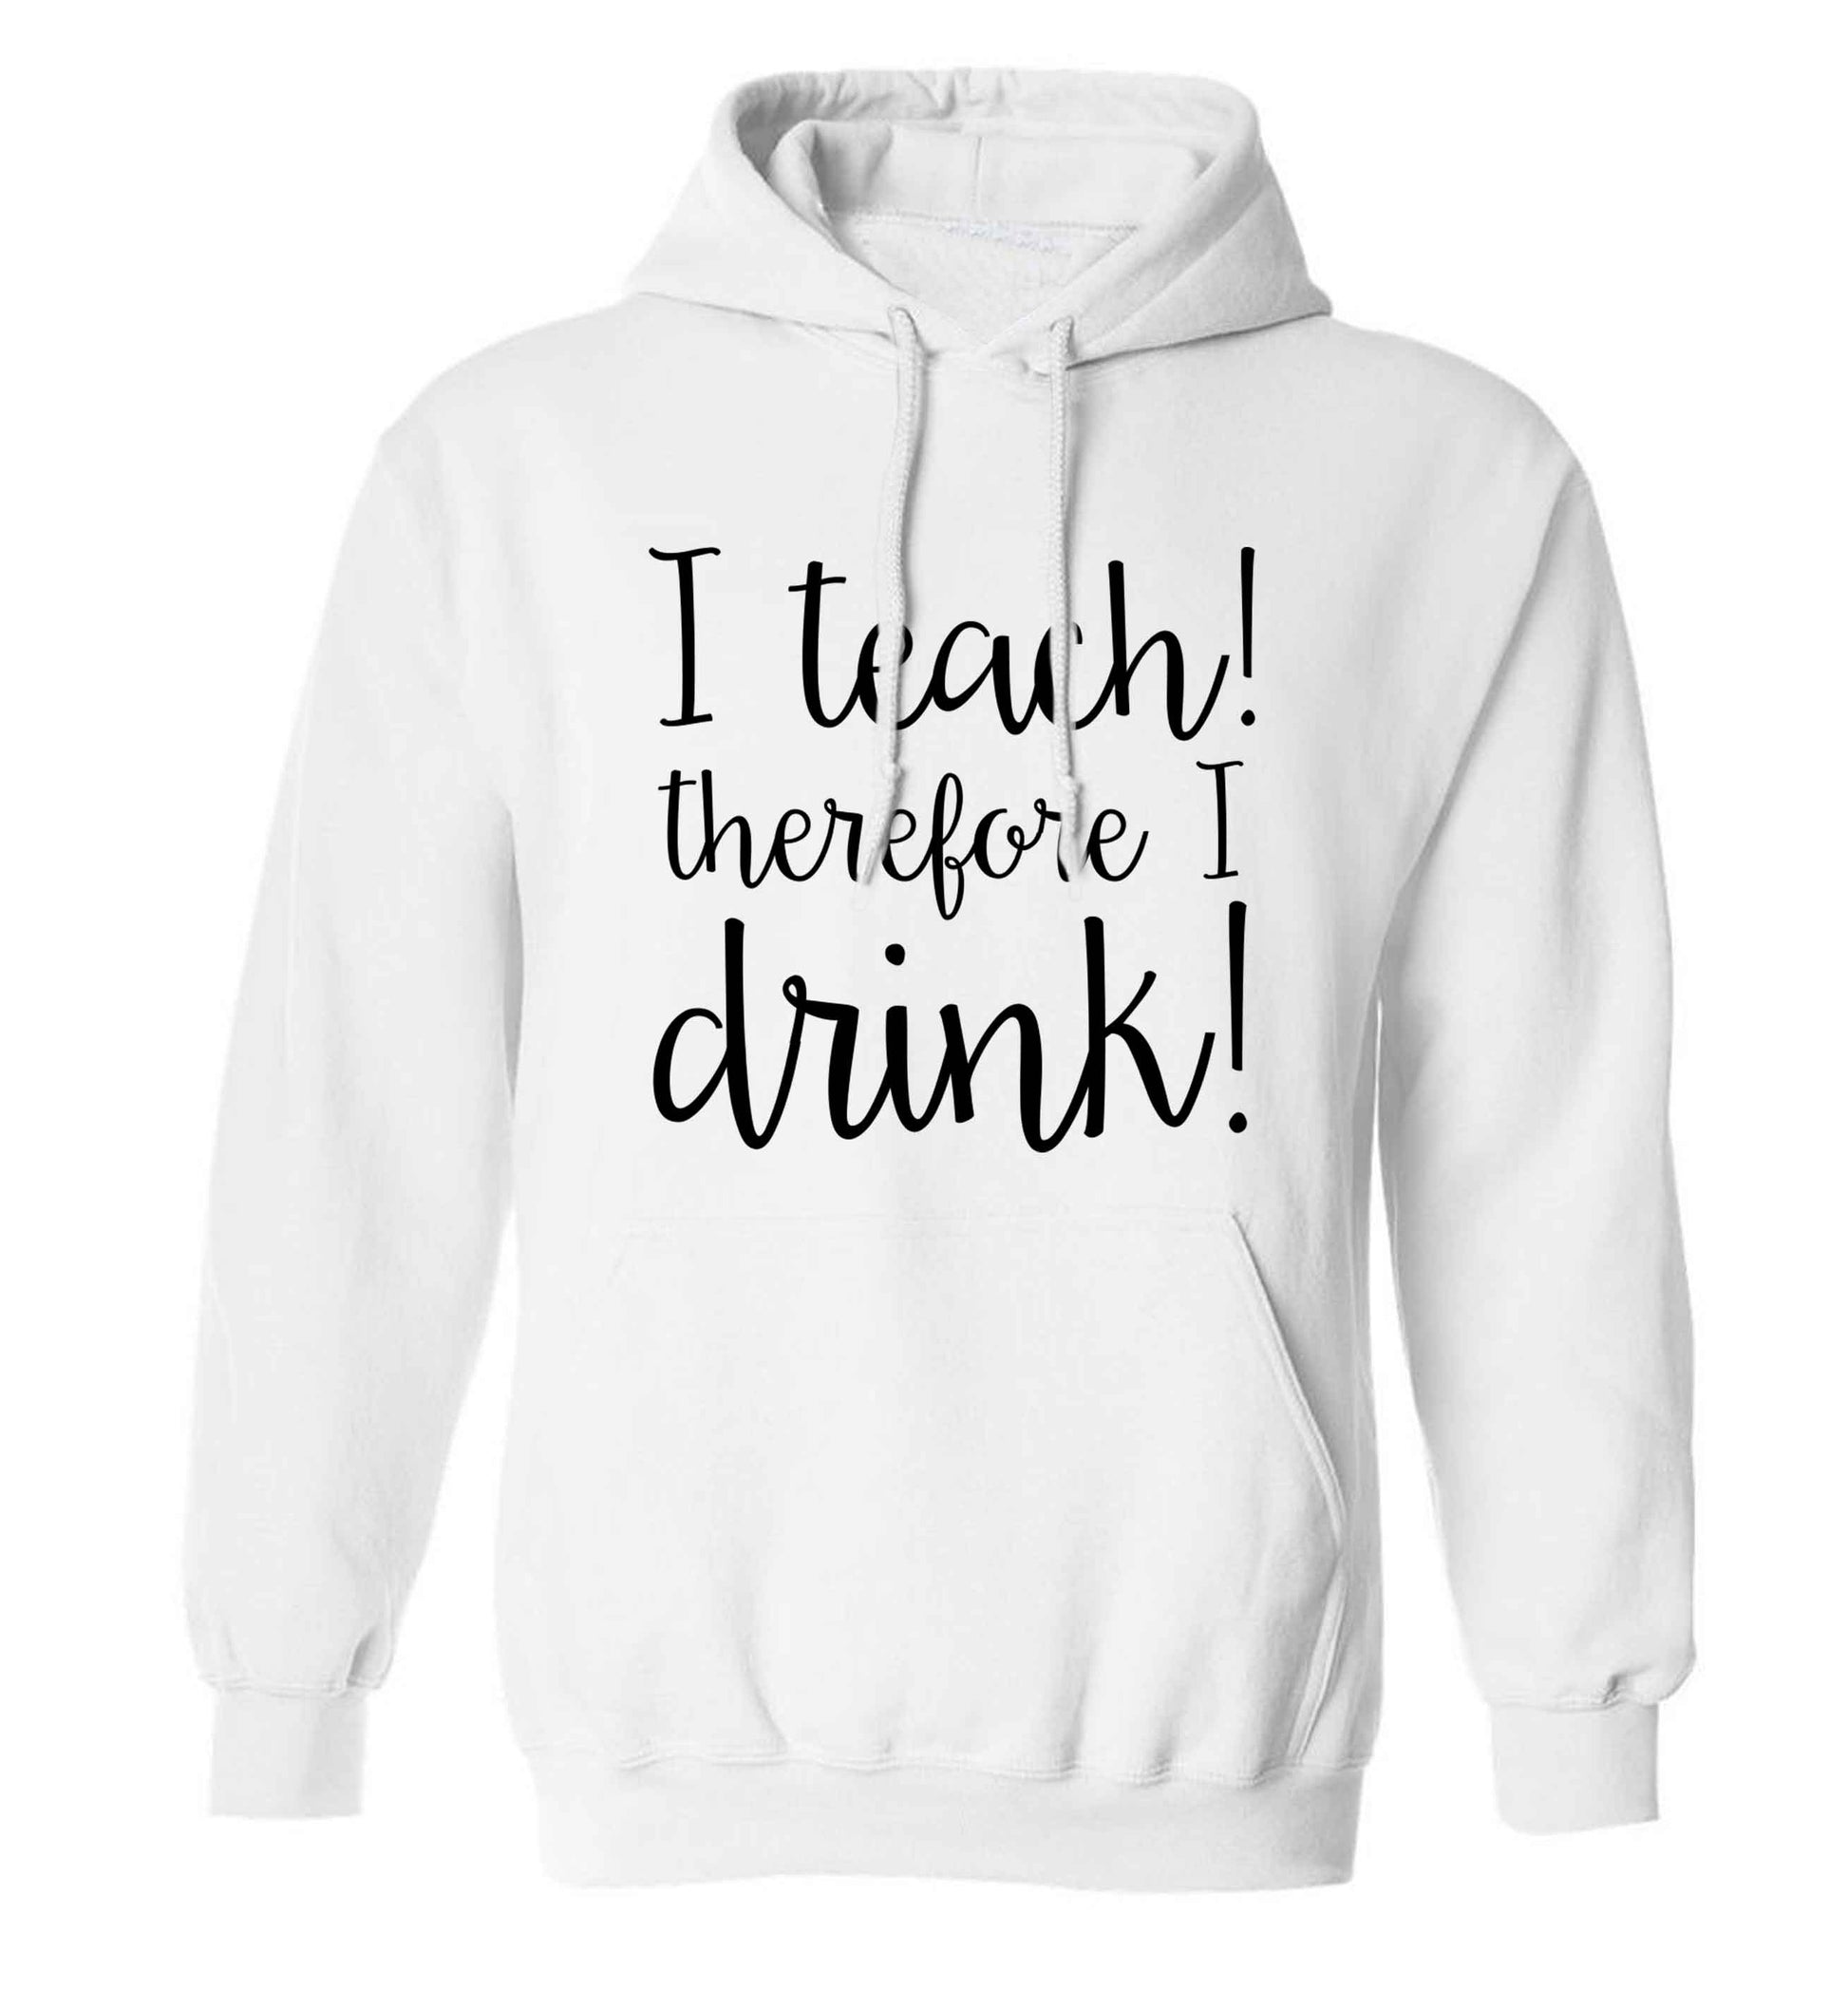 I teach therefore I drink adults unisex white hoodie 2XL